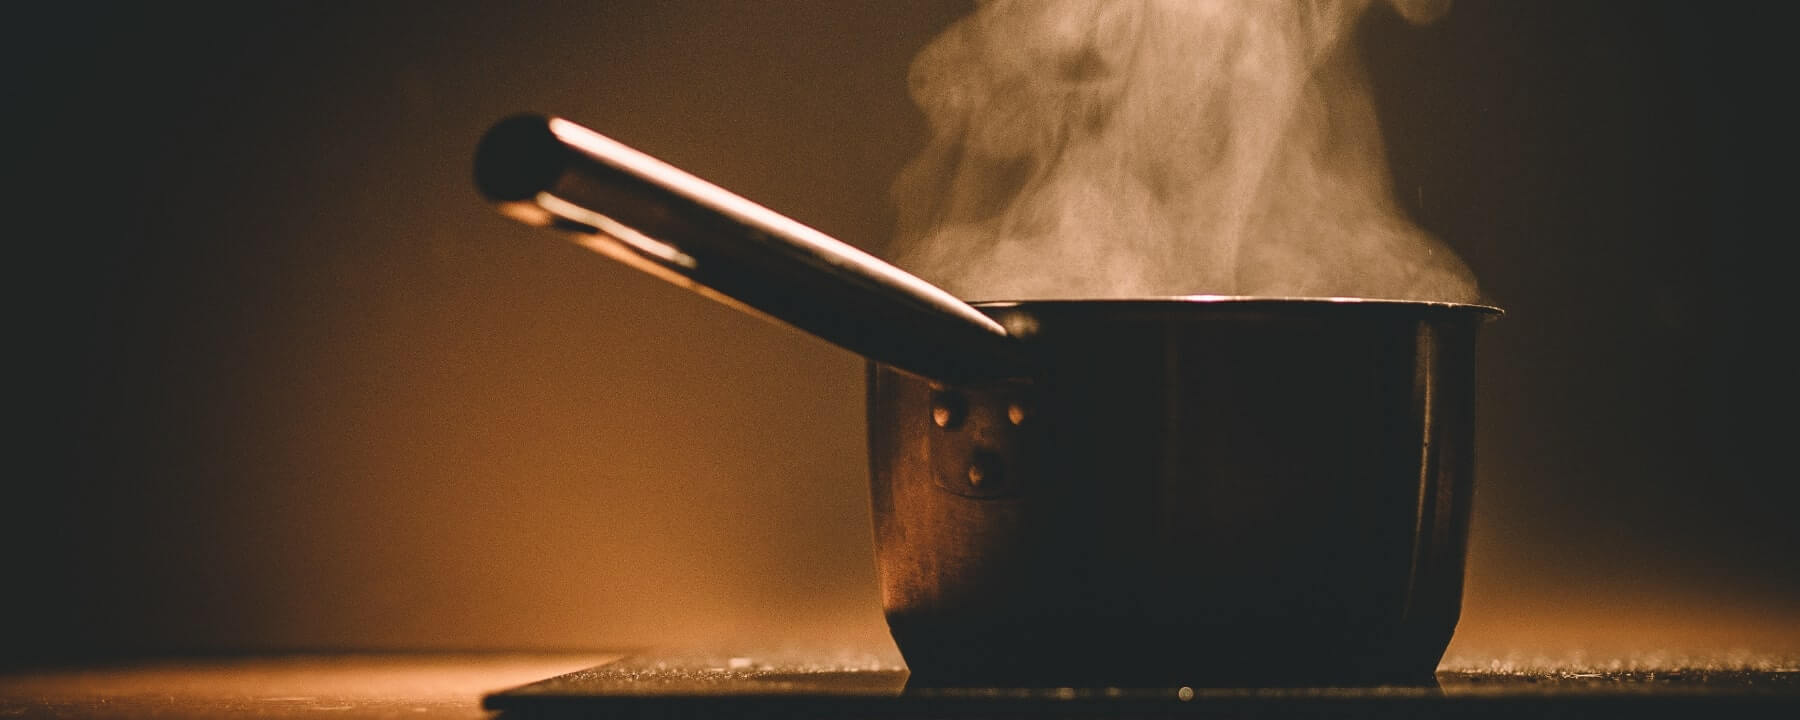 The Top 6 Things to Know About Cooking With Cannabis